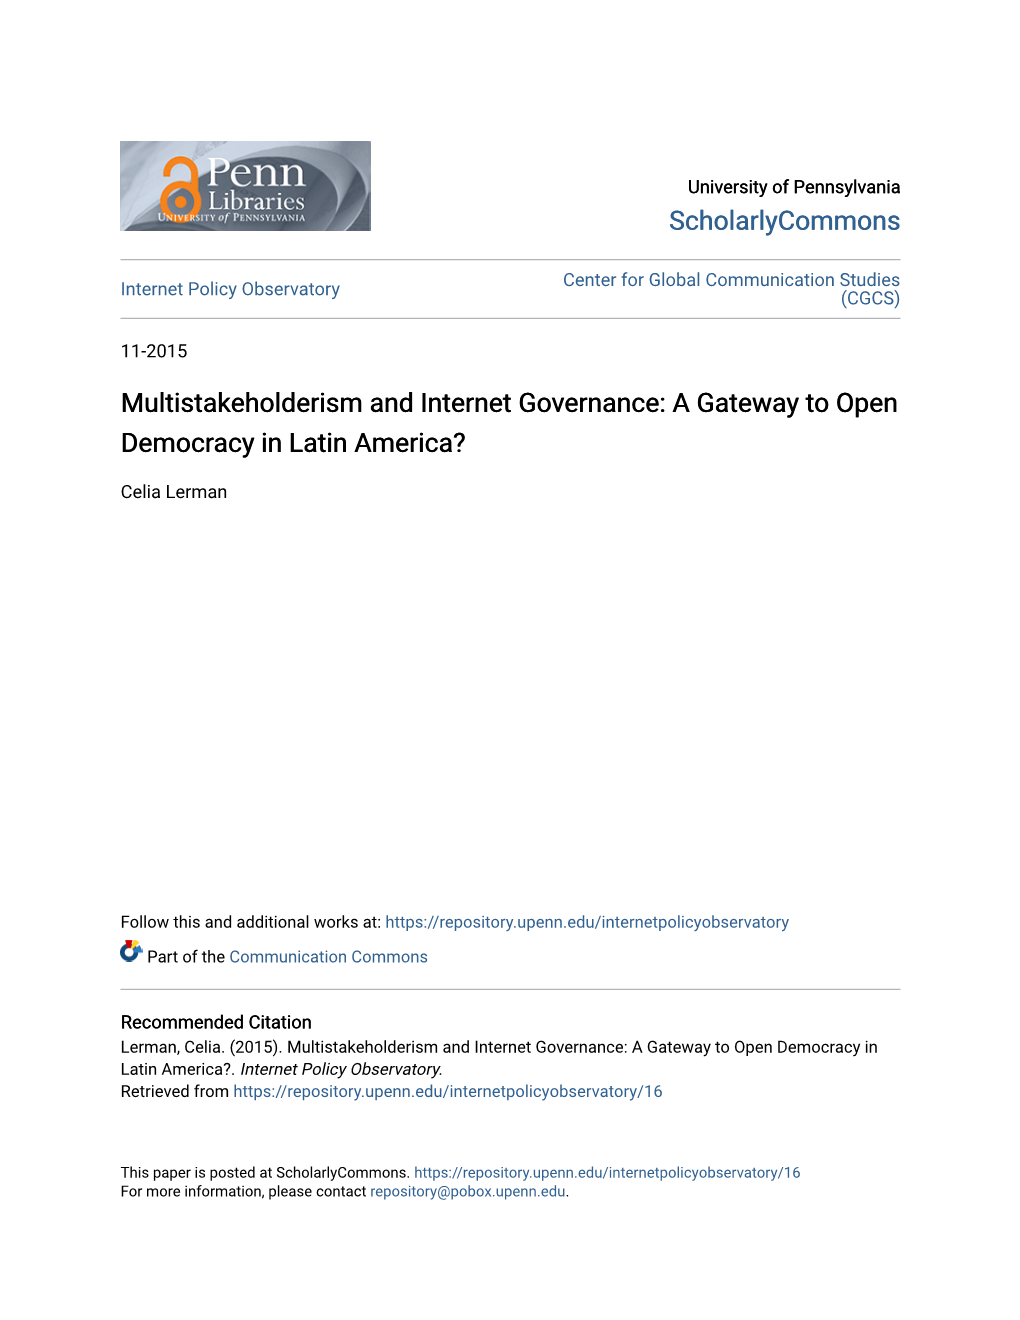 Multistakeholderism and Internet Governance: a Gateway to Open Democracy in Latin America?